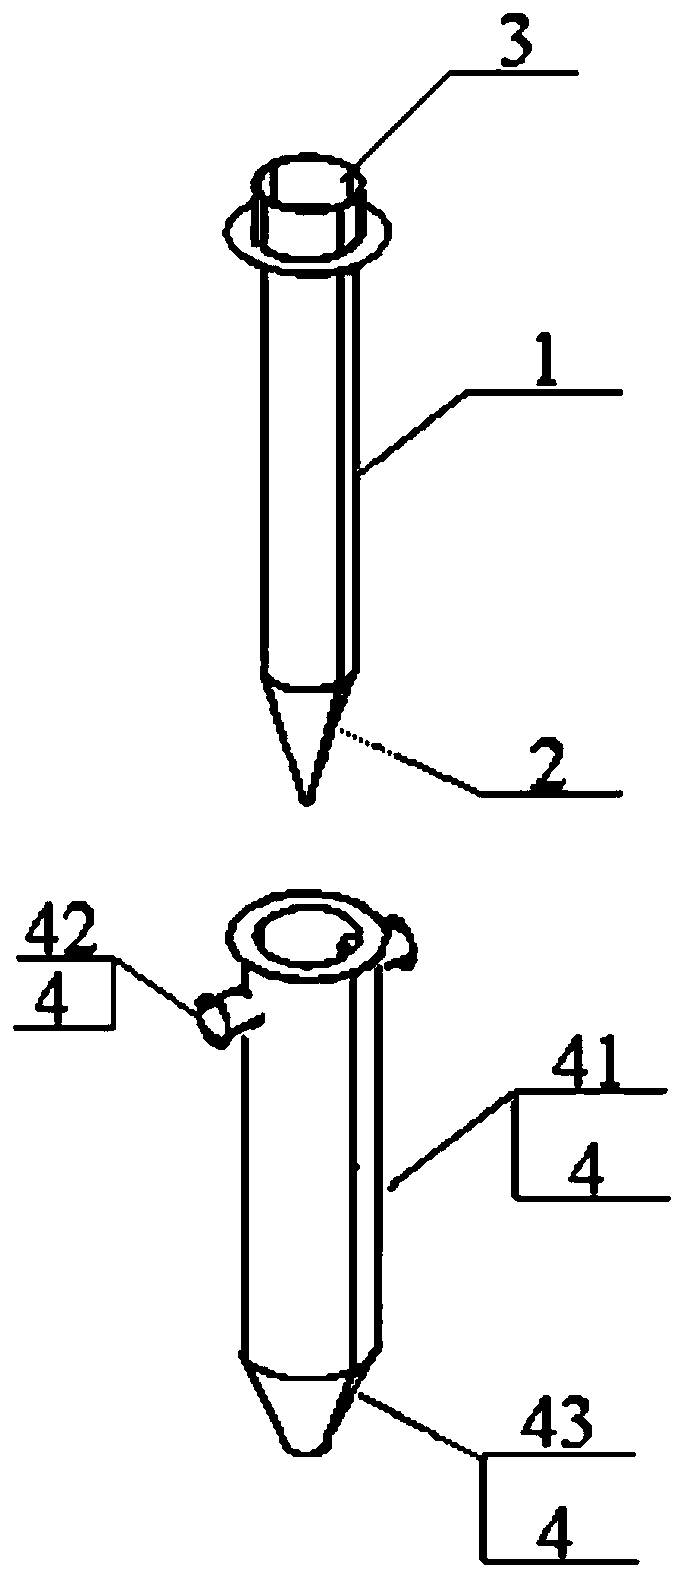 An electrospinning nozzle and an electrospinning device